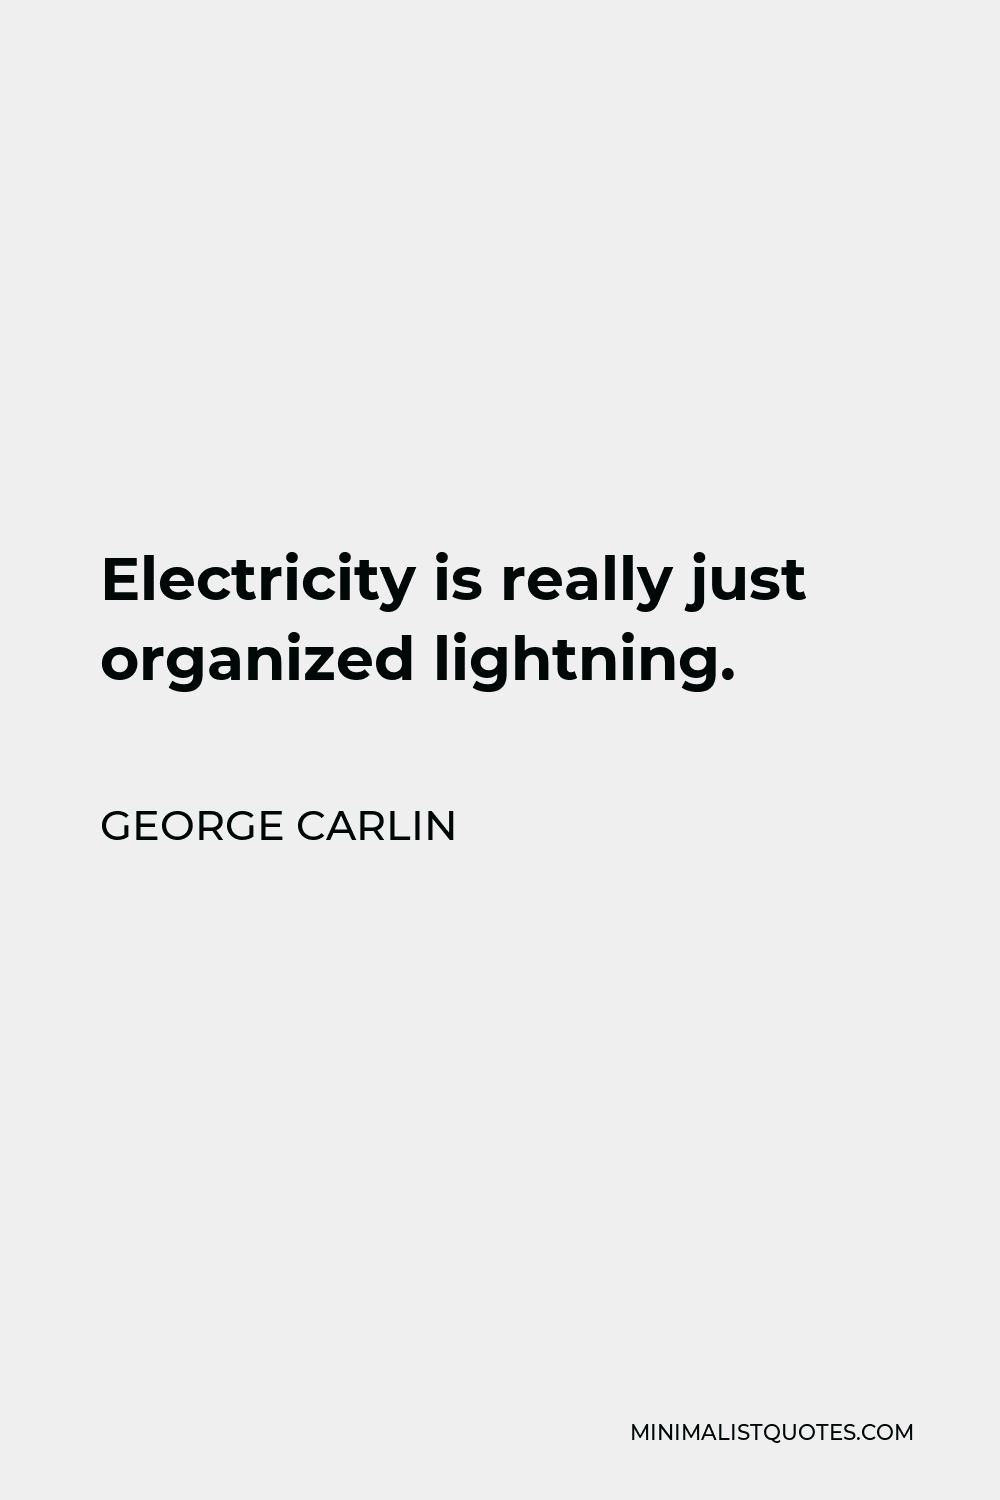 George Carlin Quote - Electricity is really just organized lightning.